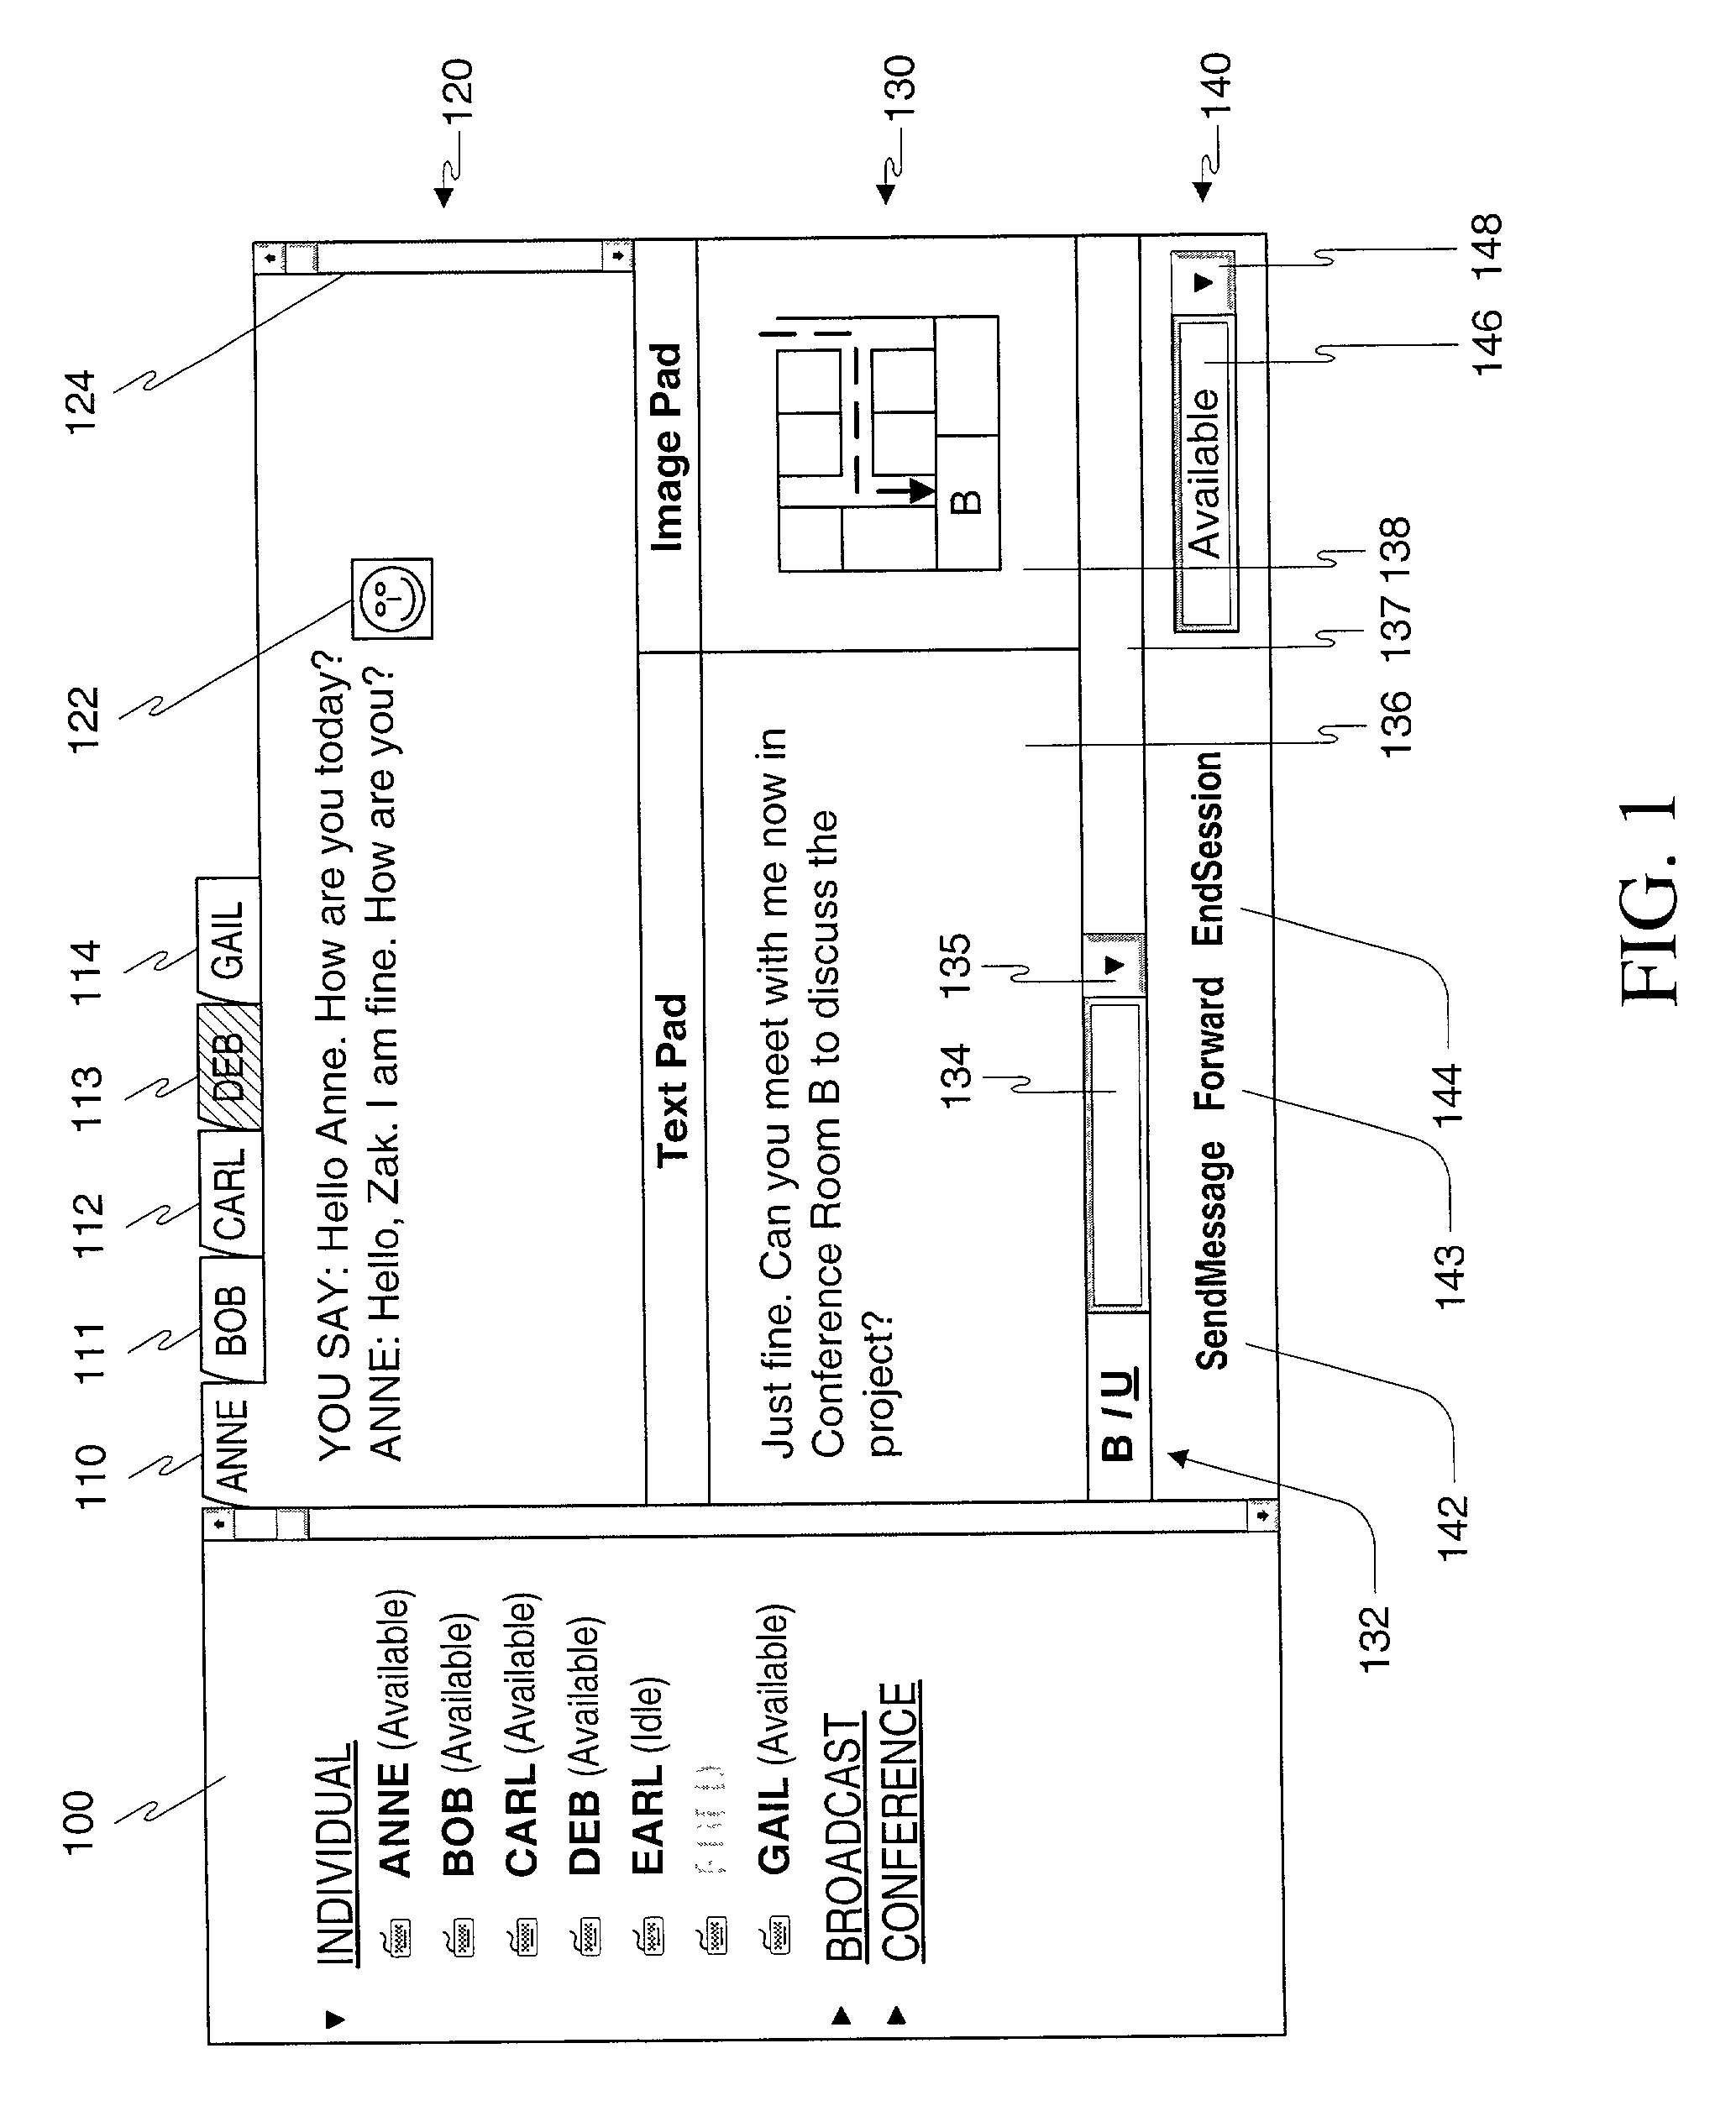 Method, apparatus and computer readable medium for multiple messaging session management with a graphical user interfacse